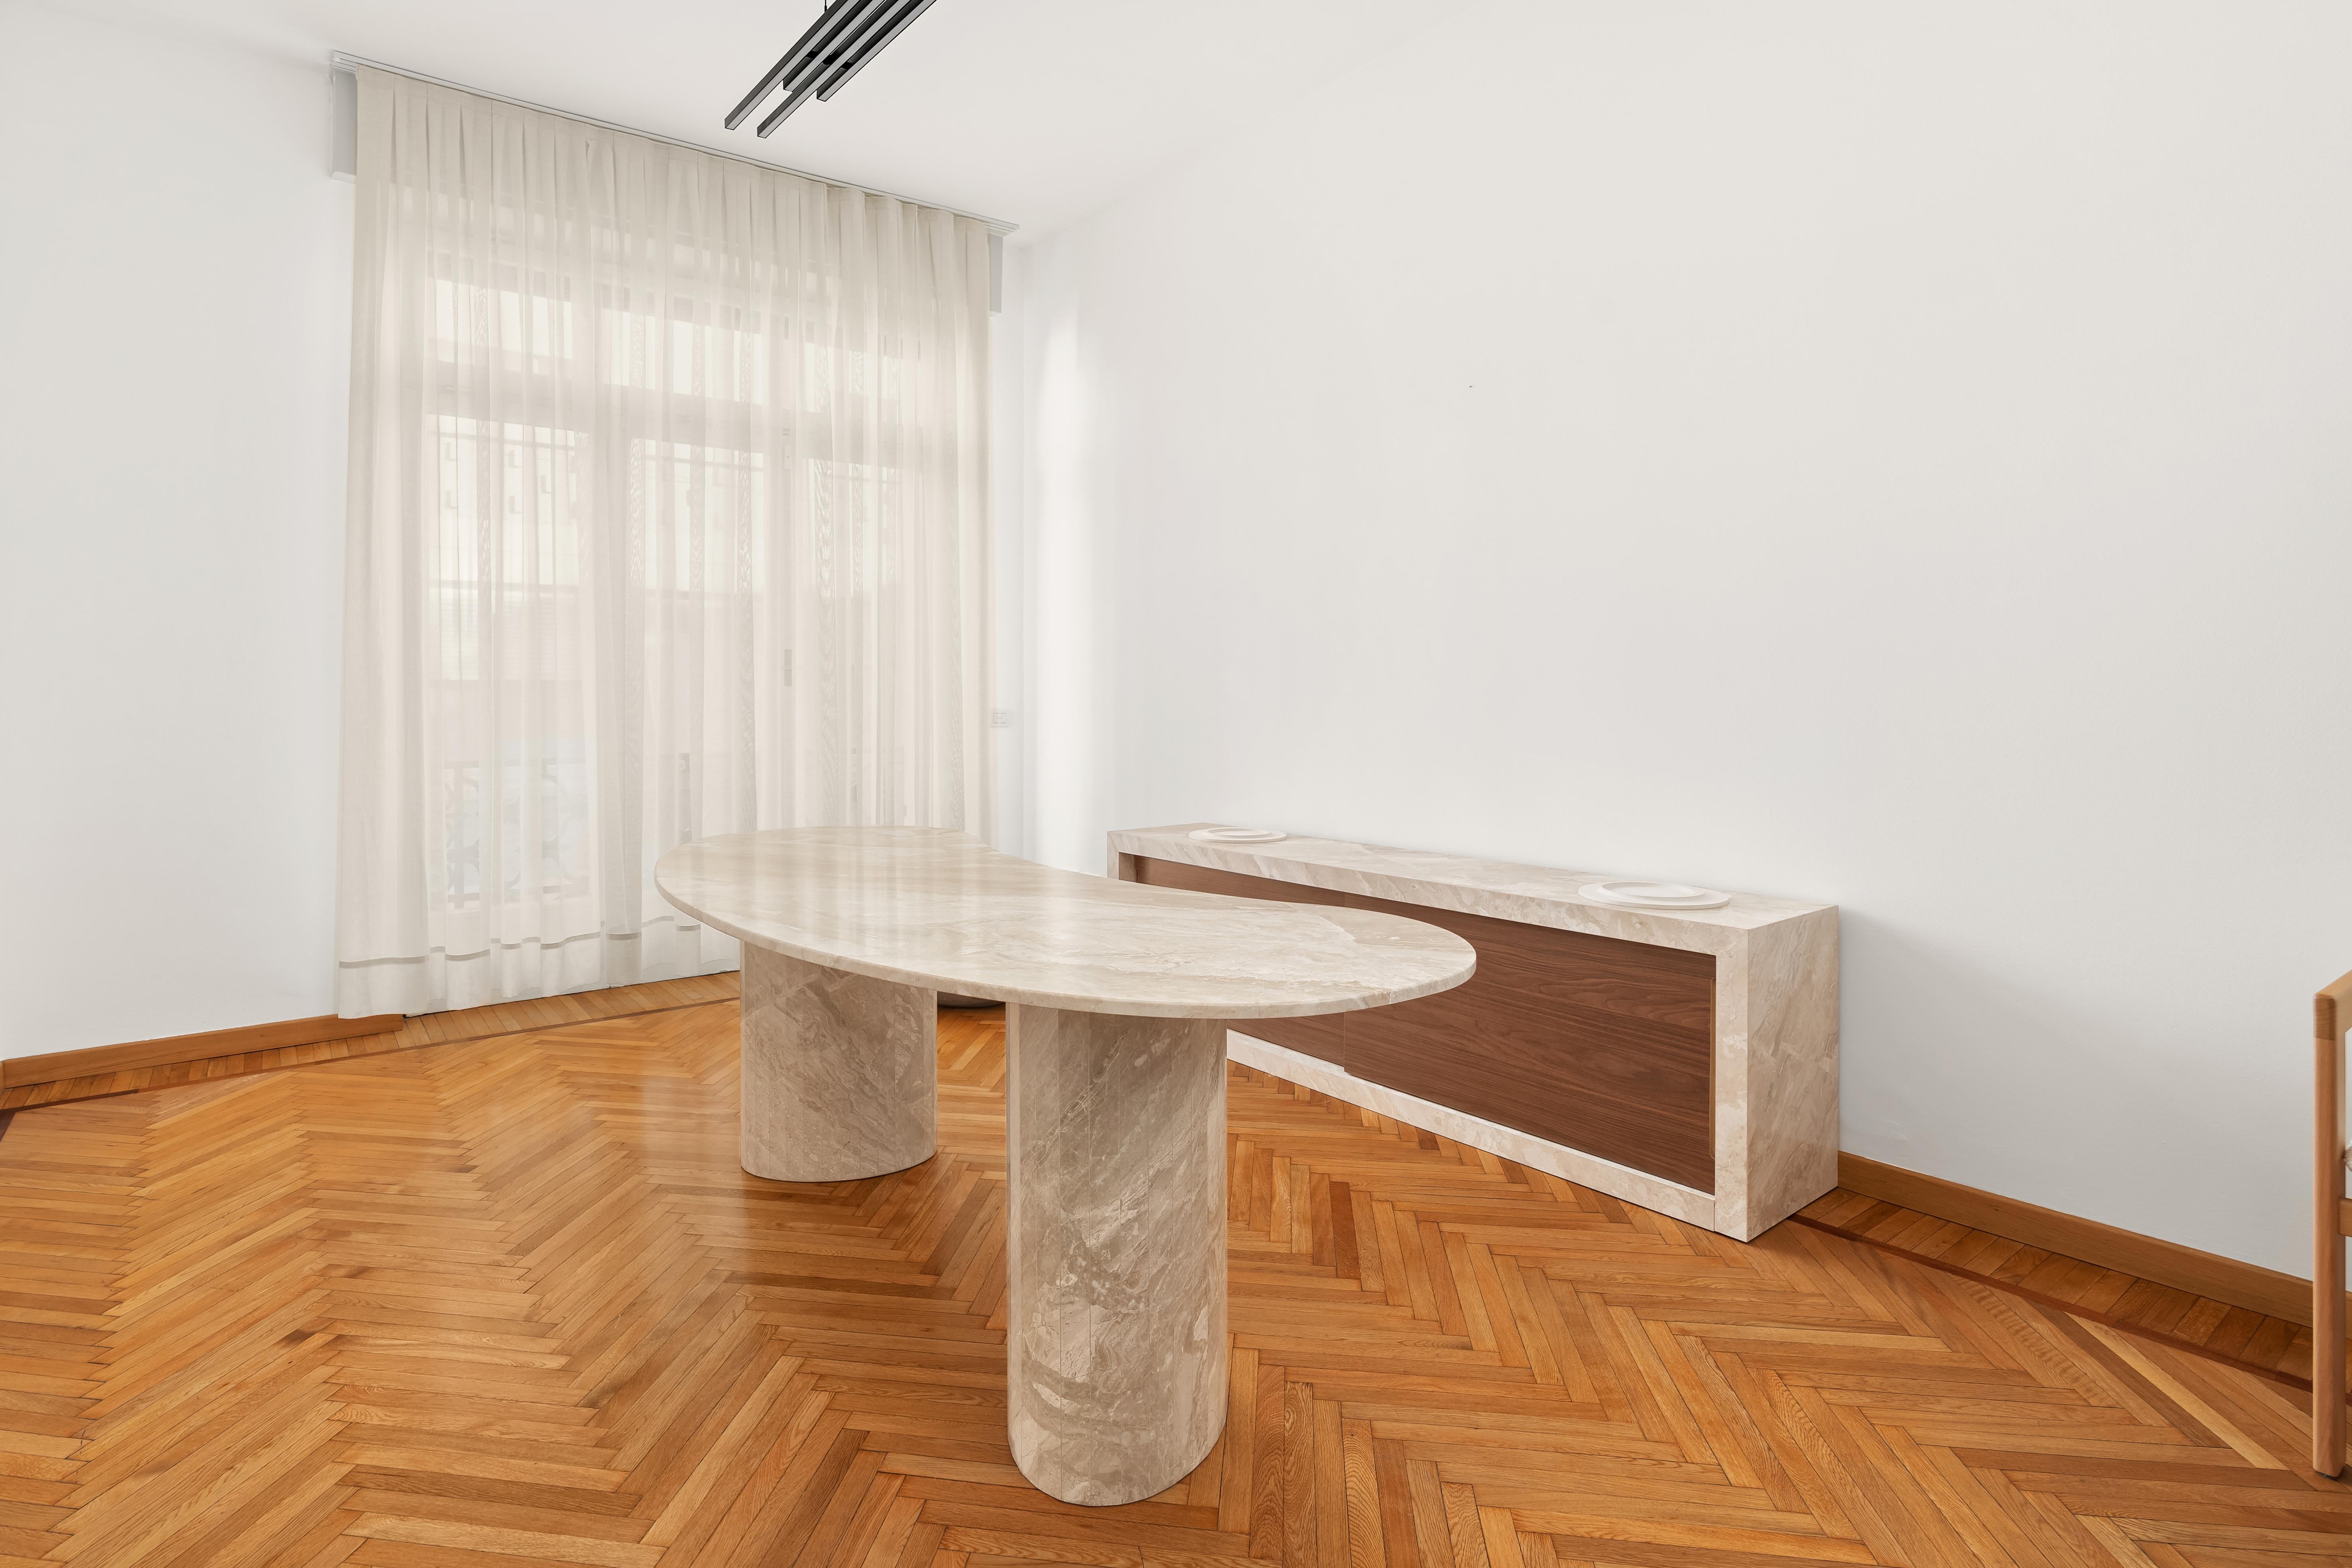 Sinuo Dining Table by STUDIO IB MILANO
Dimensions: W 220 x H 75 cm.
Materials: Beige Onyx.

Also available in other stones.

Ina Borisova is the creative force behind Studio IB Milano. With a diverse background in product engineering and interior